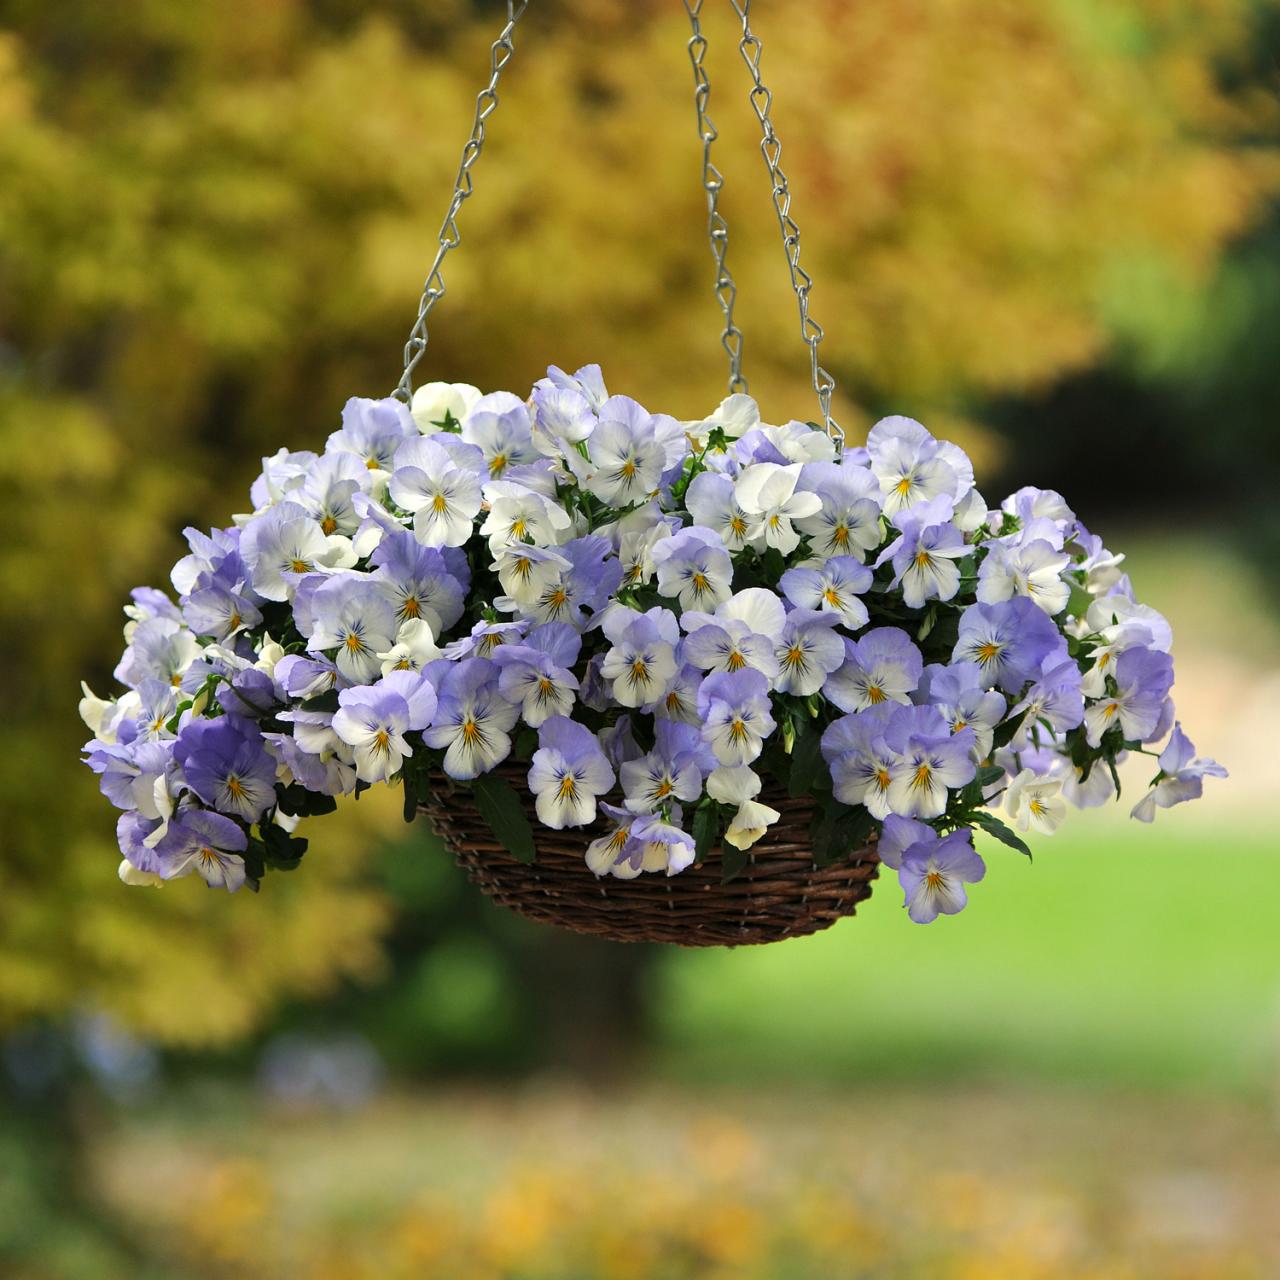 Trailing Pansies in Baskets